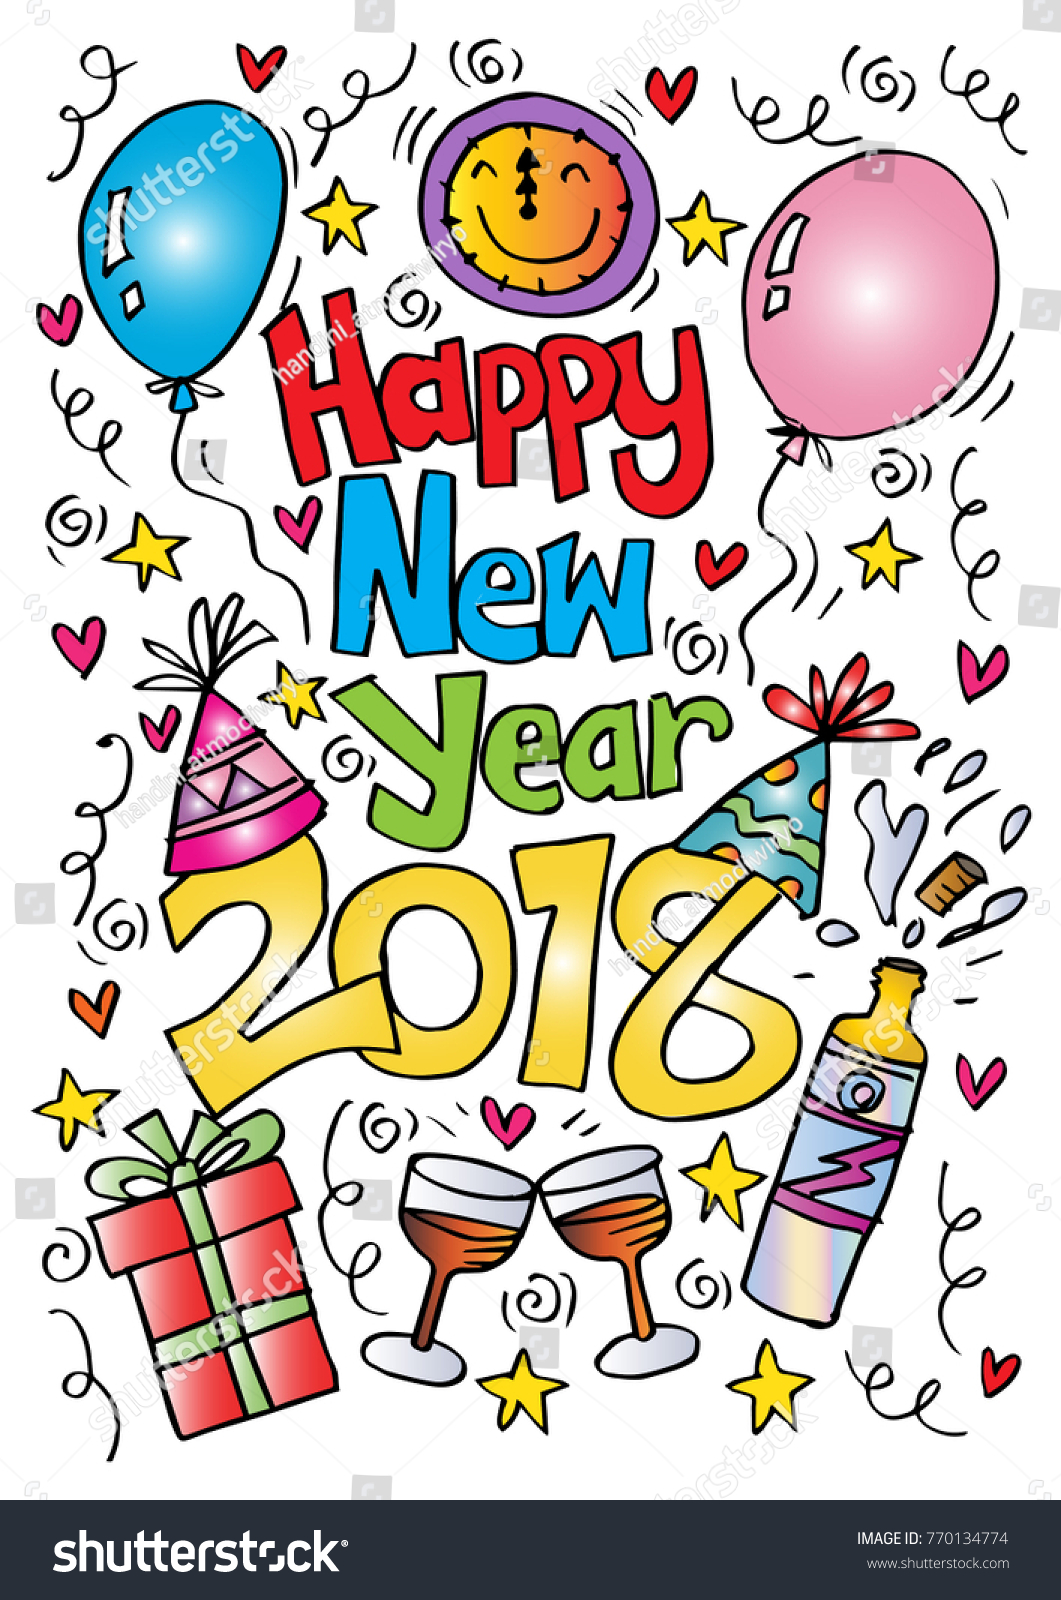 Doodle Happy New Year 2018 Stock Vector Royalty Free 770134774